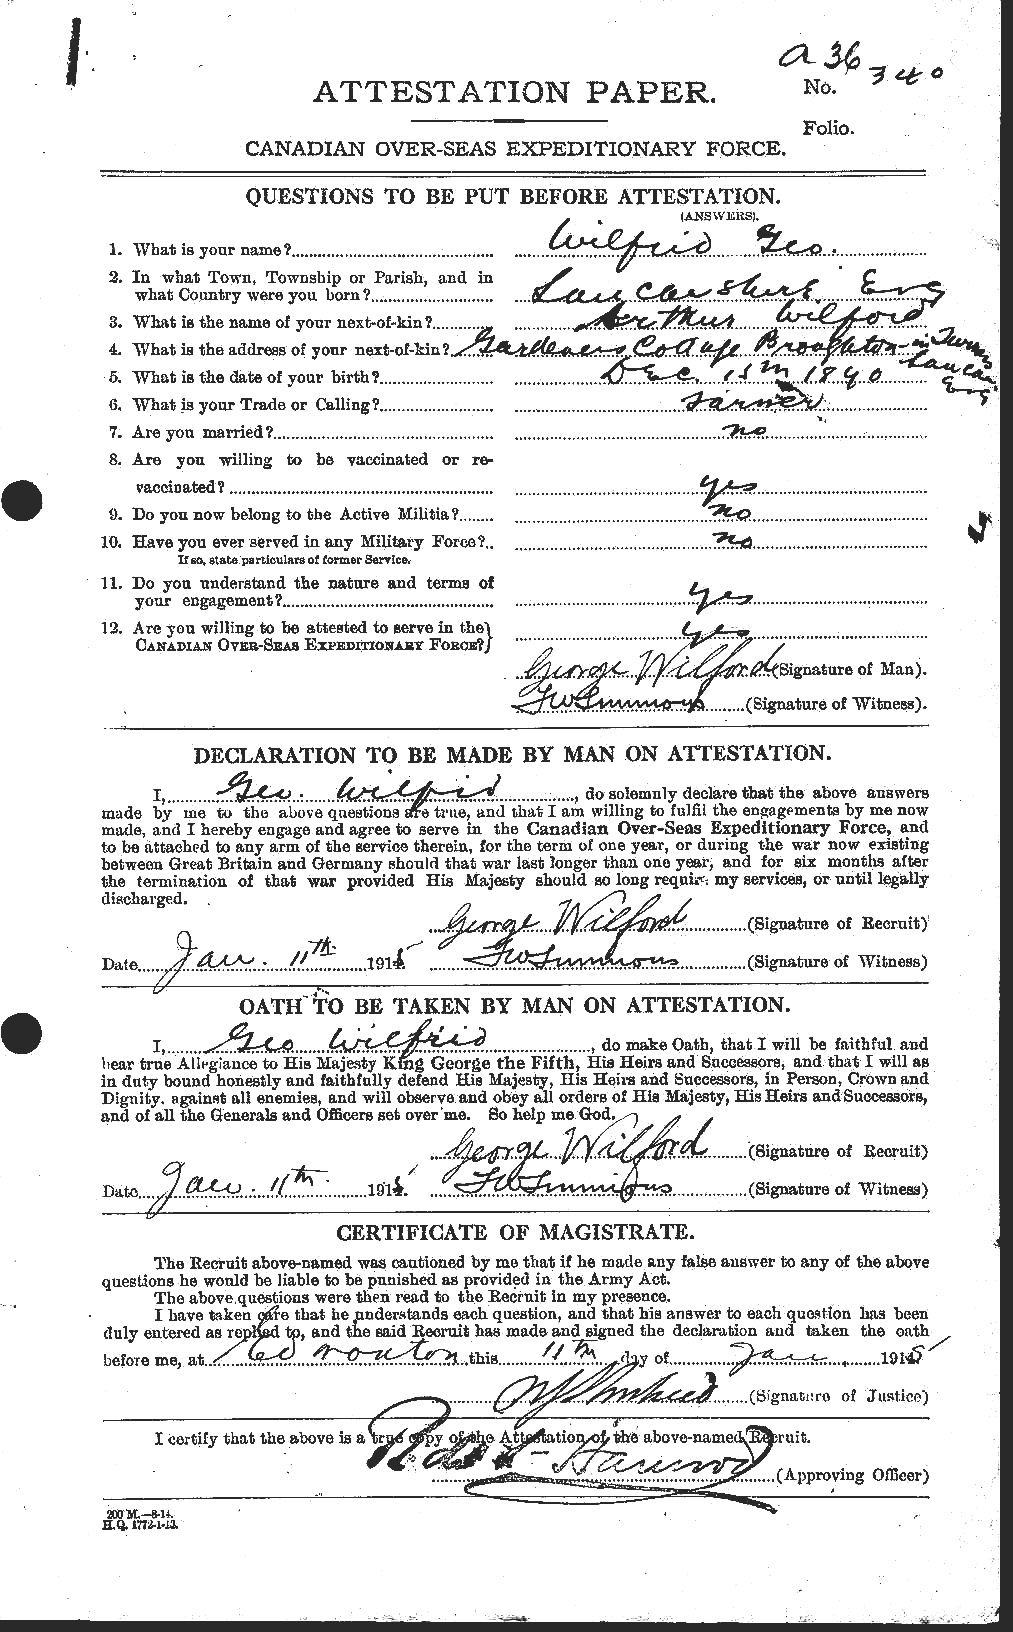 Personnel Records of the First World War - CEF 680280a